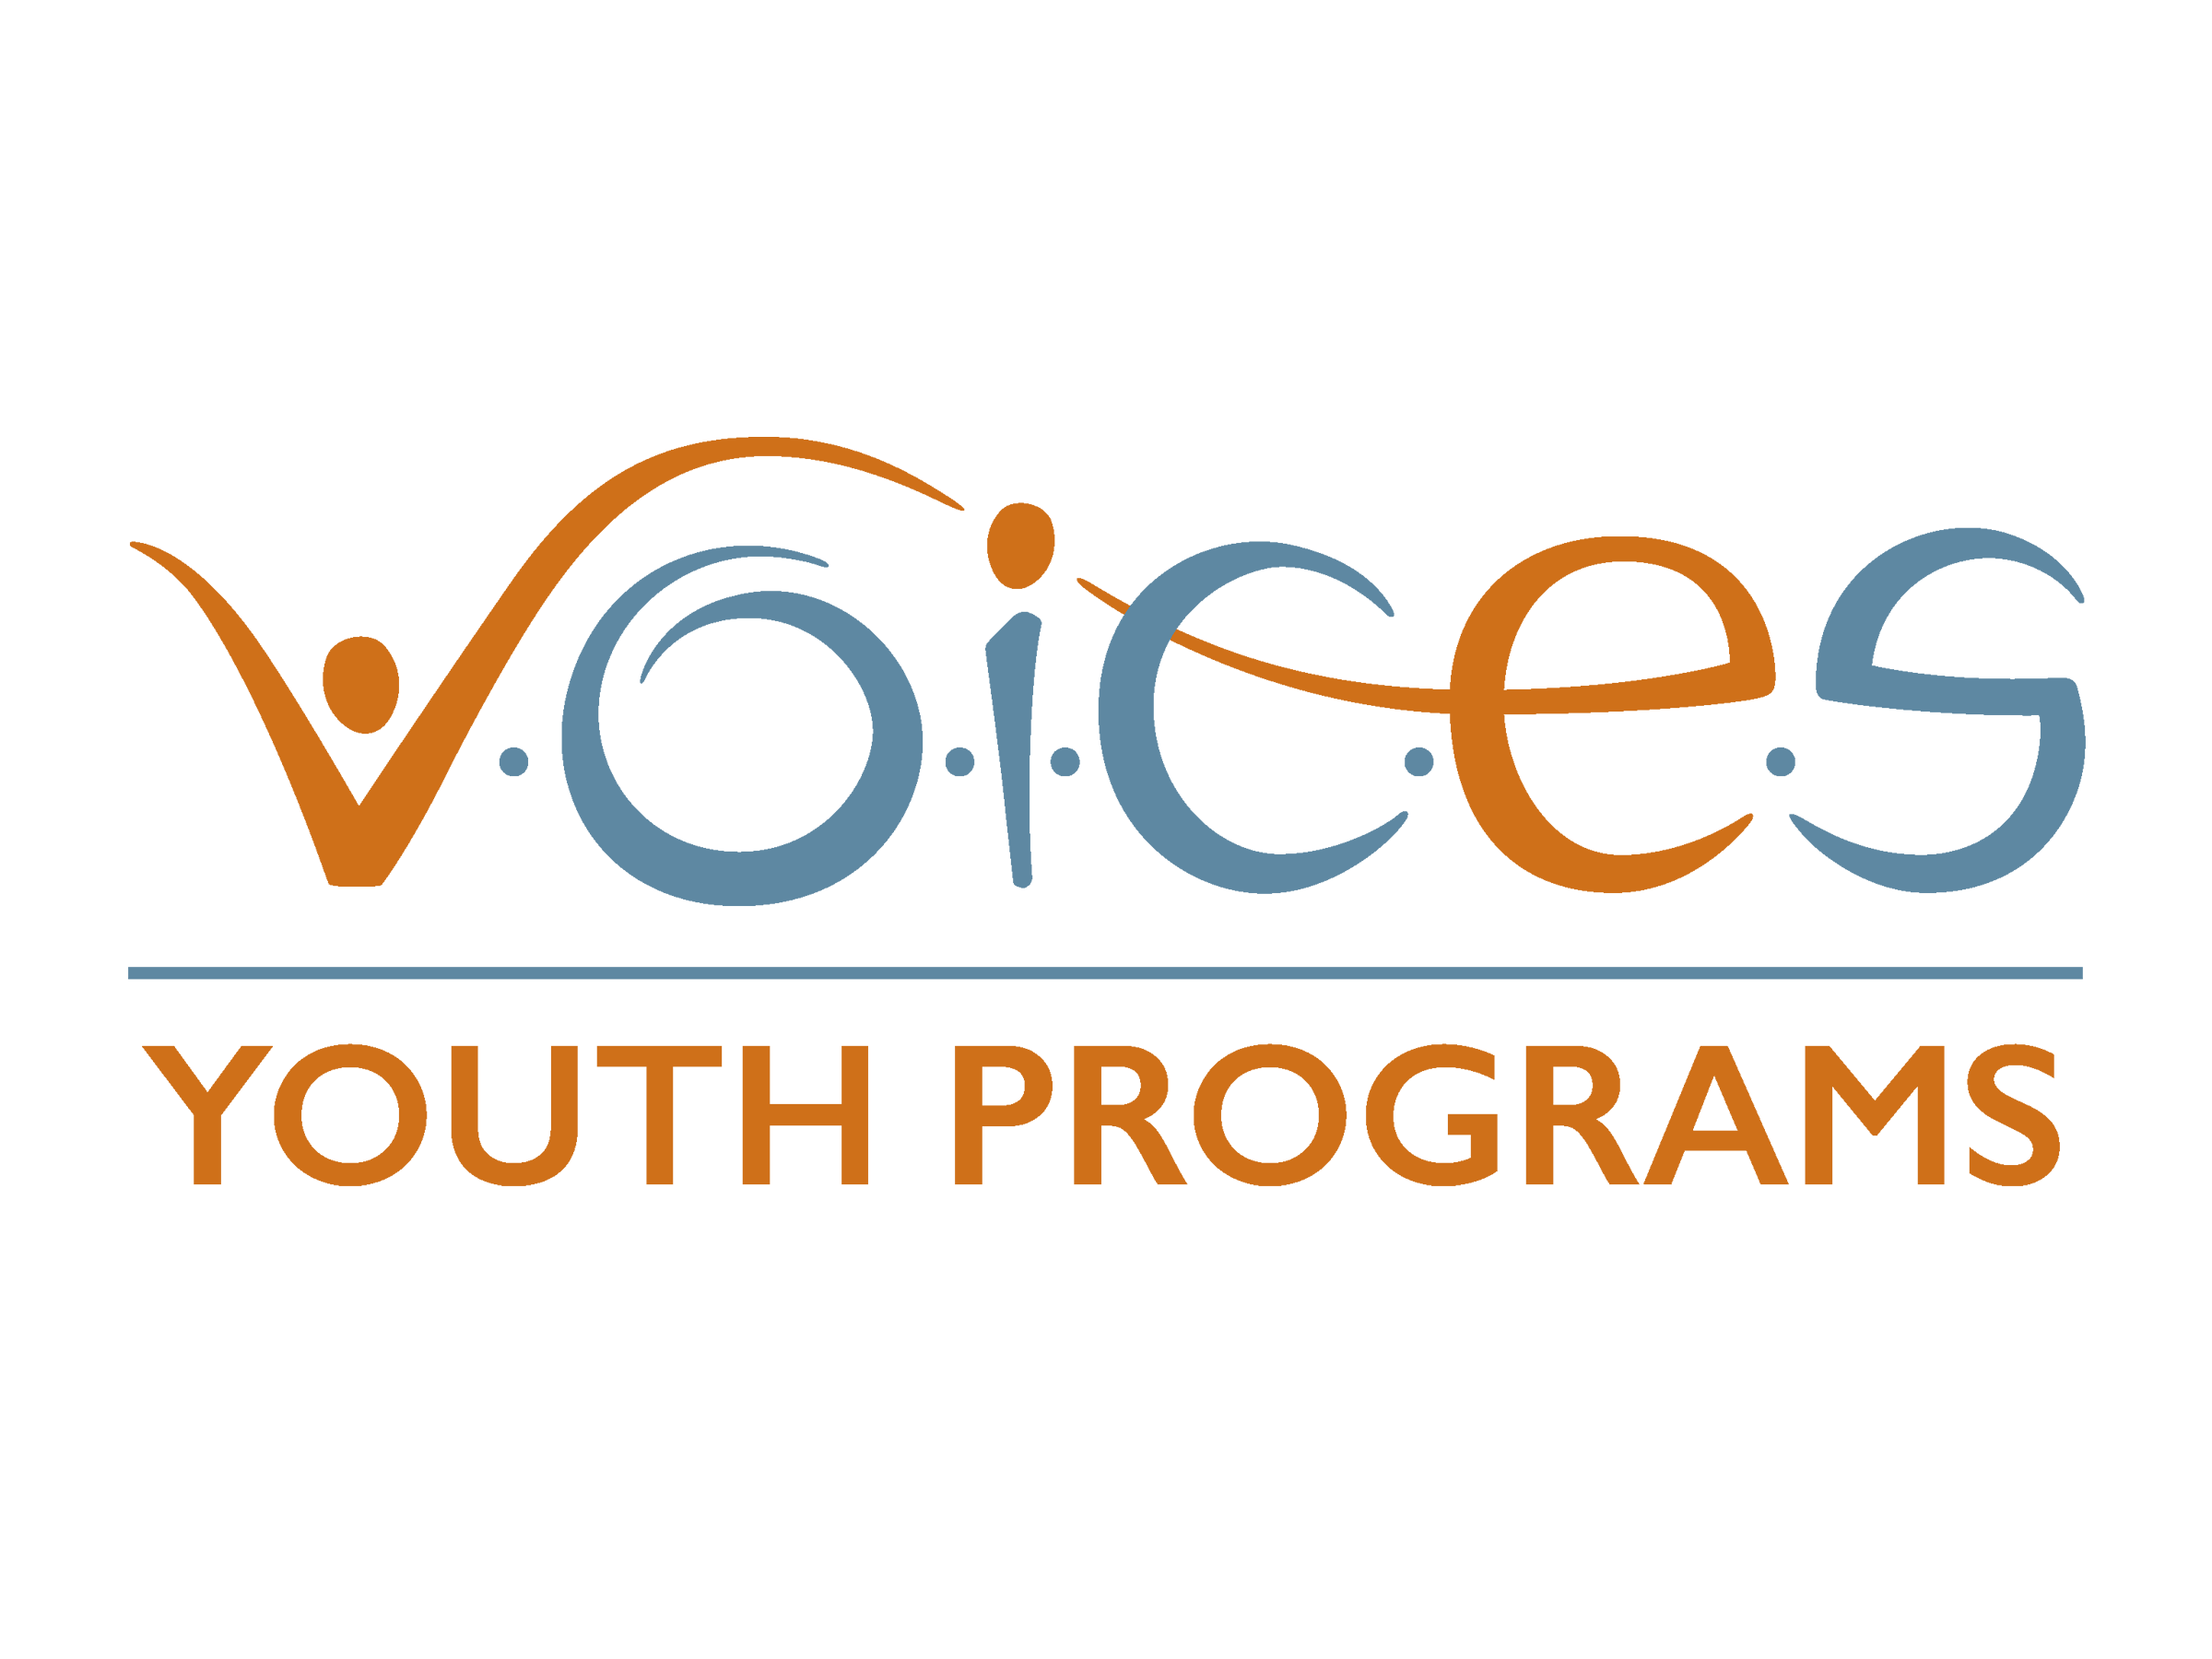 VOICES Youth Programs